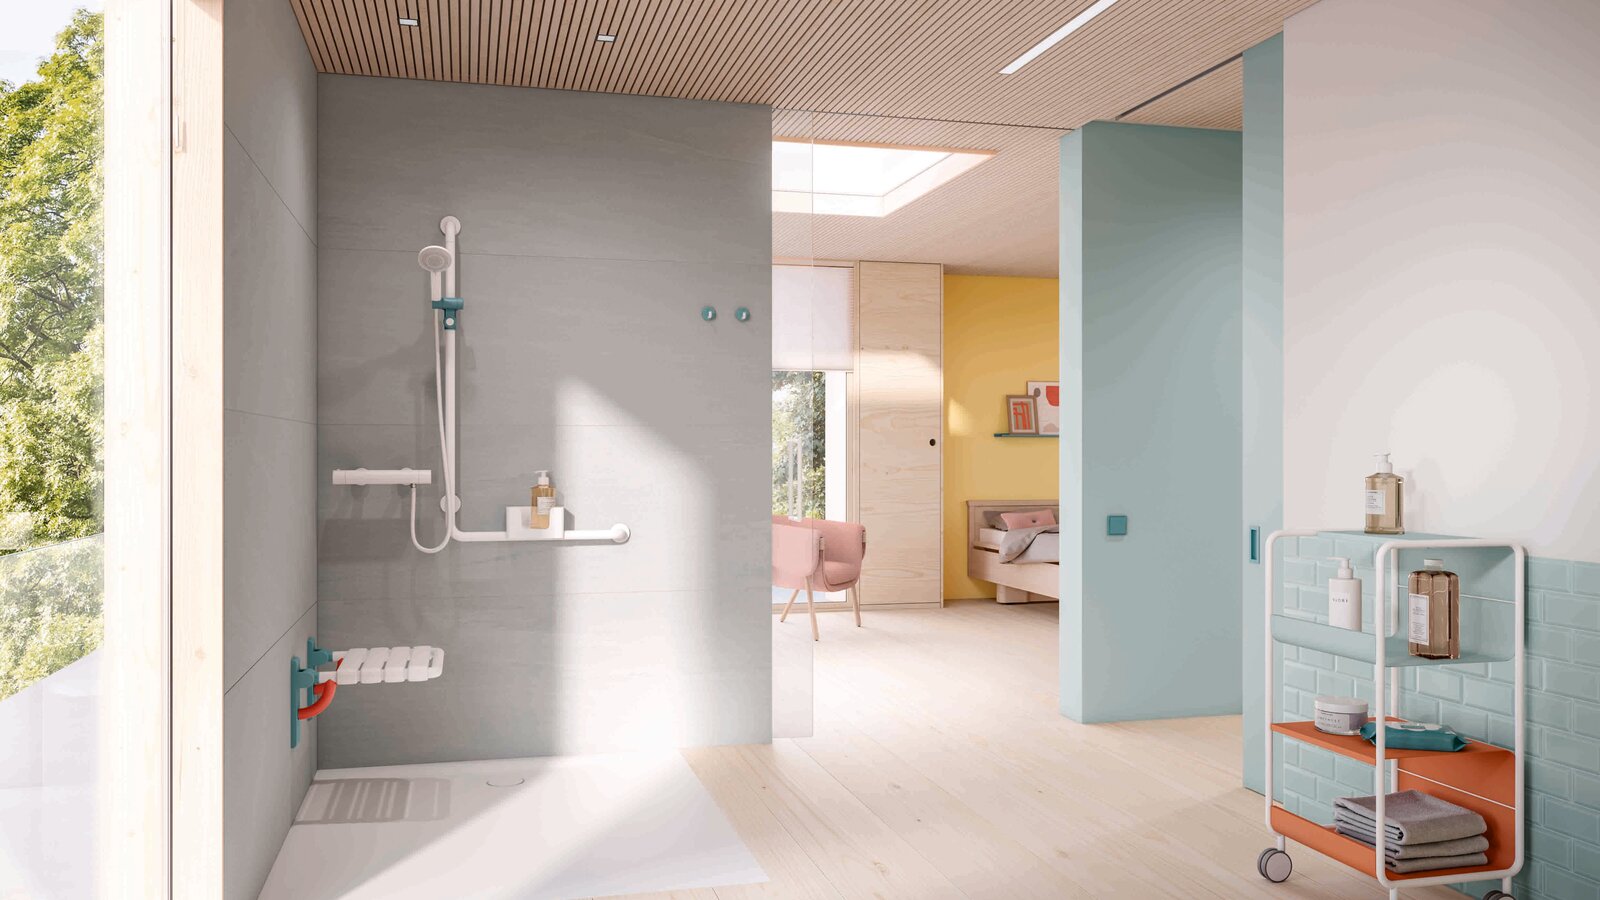 Barrier-free shower area in a patient room